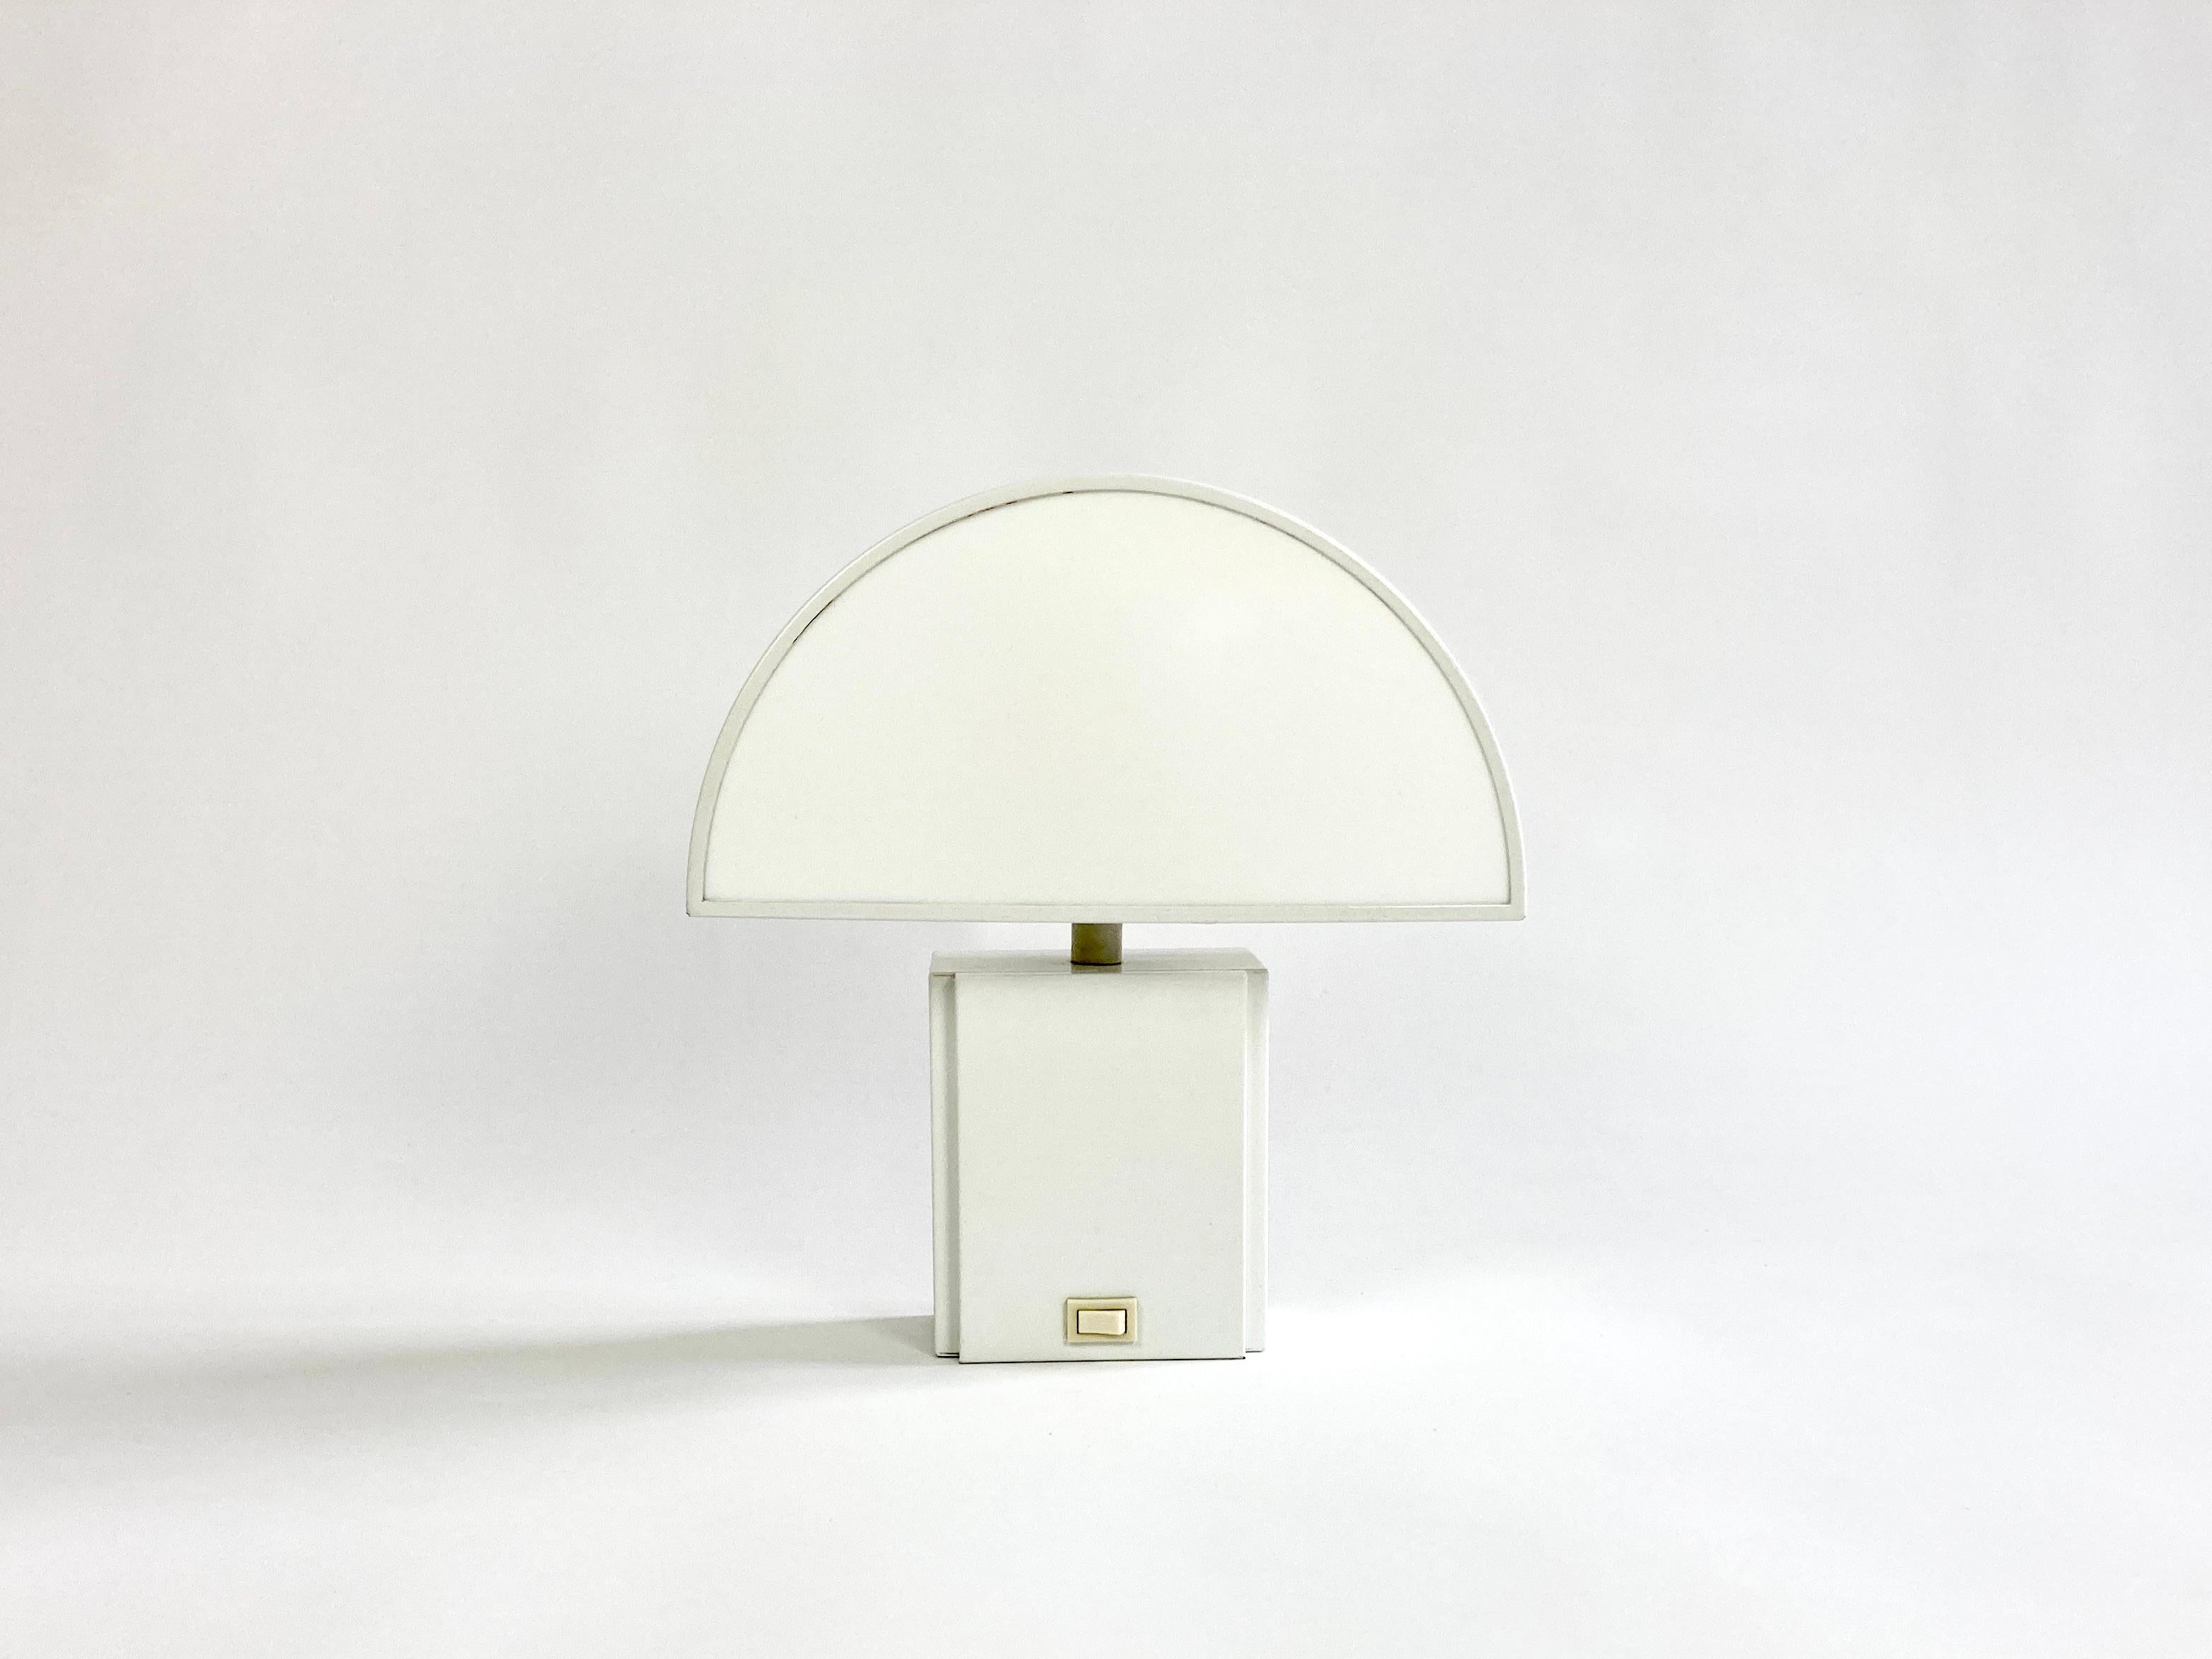 1970s Harvey Guzzini Olympe lamp.

This is the smallest lamp in the series designed by Harvey Guzzini in the 1970's and produced by ED.

Can be used as a wall or table lamp.

The lamp is an elegant geometric shape with opaque plastic that